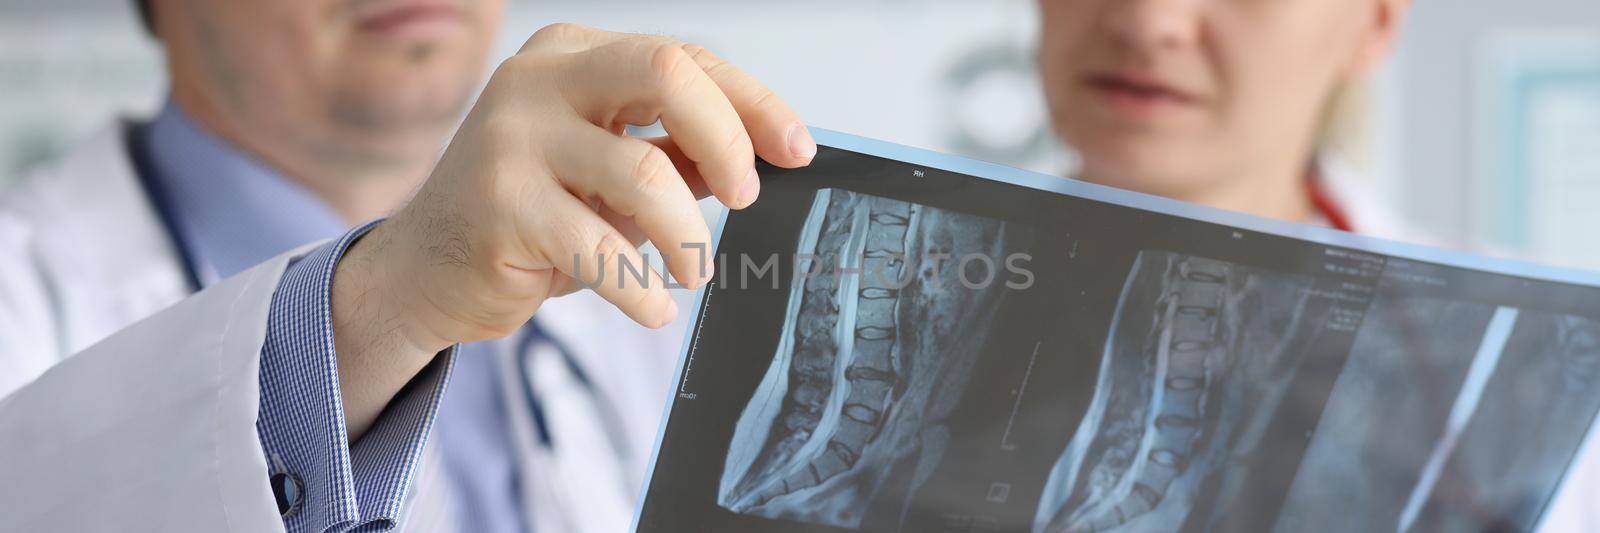 Close-up of doctor discussing patients xray result with colleague in hospital. Medical workers examine back scan. Healthcare, medicine, diagnostic concept